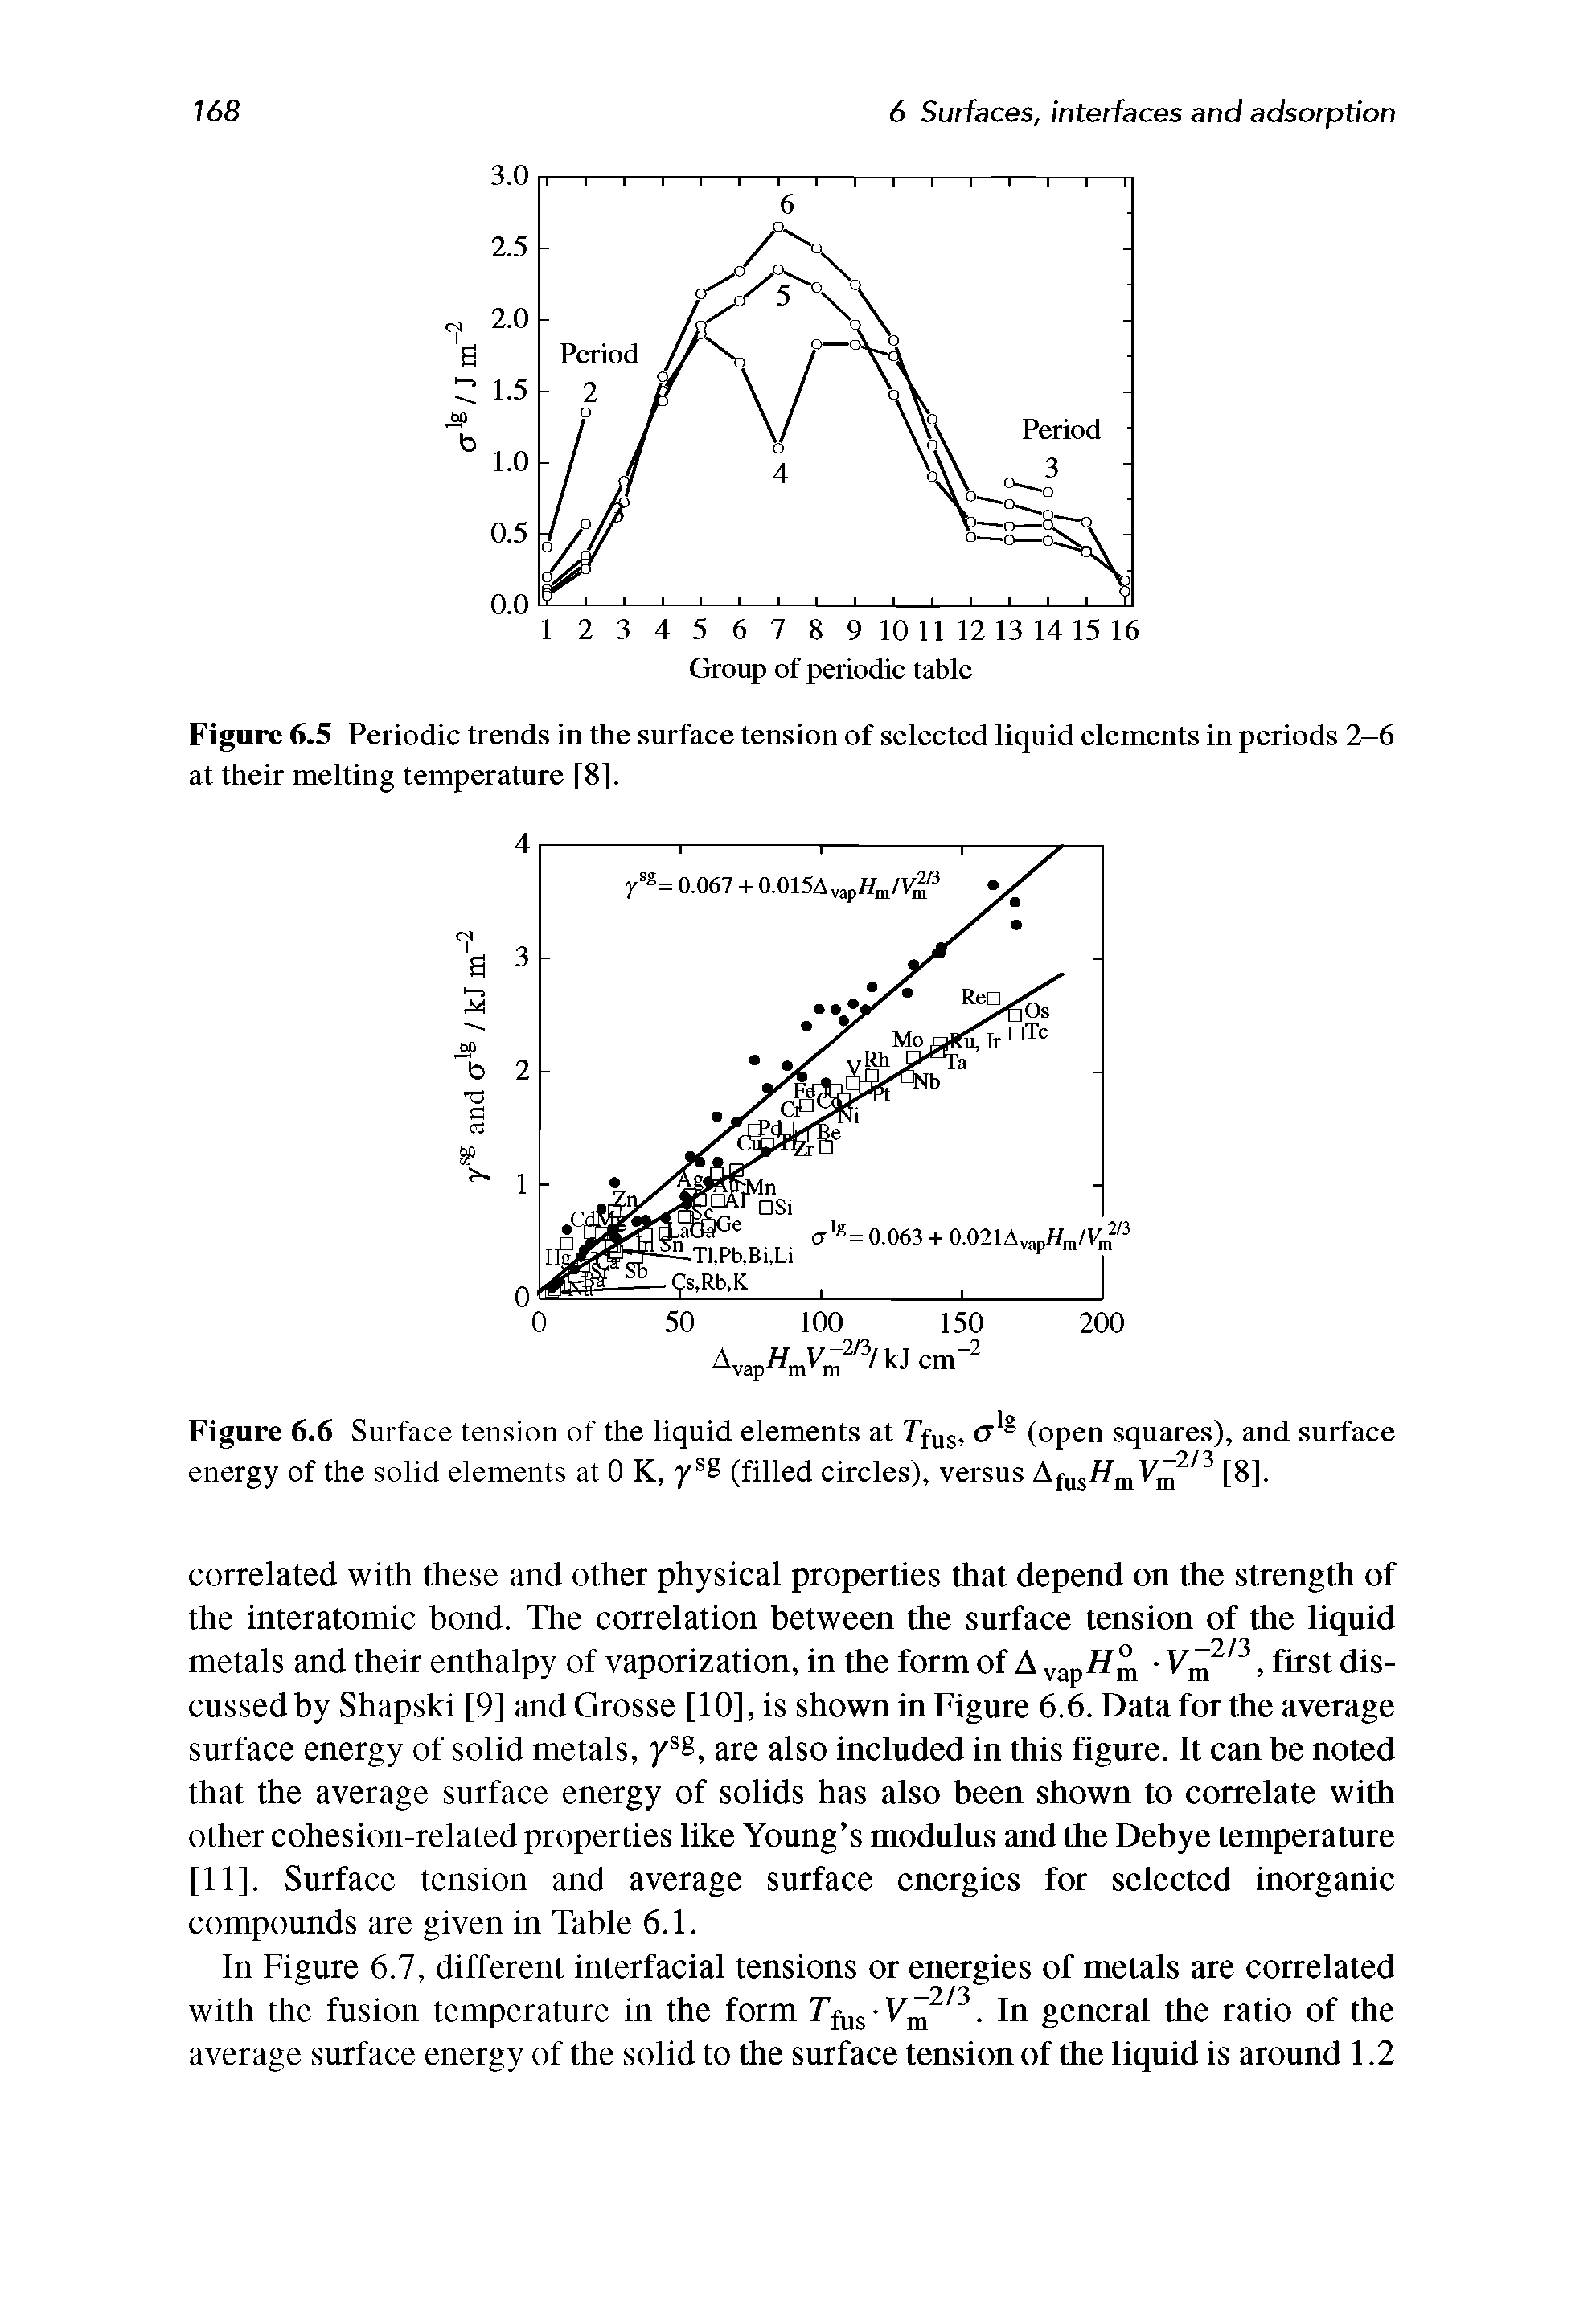 Figure 6.5 Periodic trends in the surface tension of selected liquid elements in periods 2-6 at their melting temperature [8].